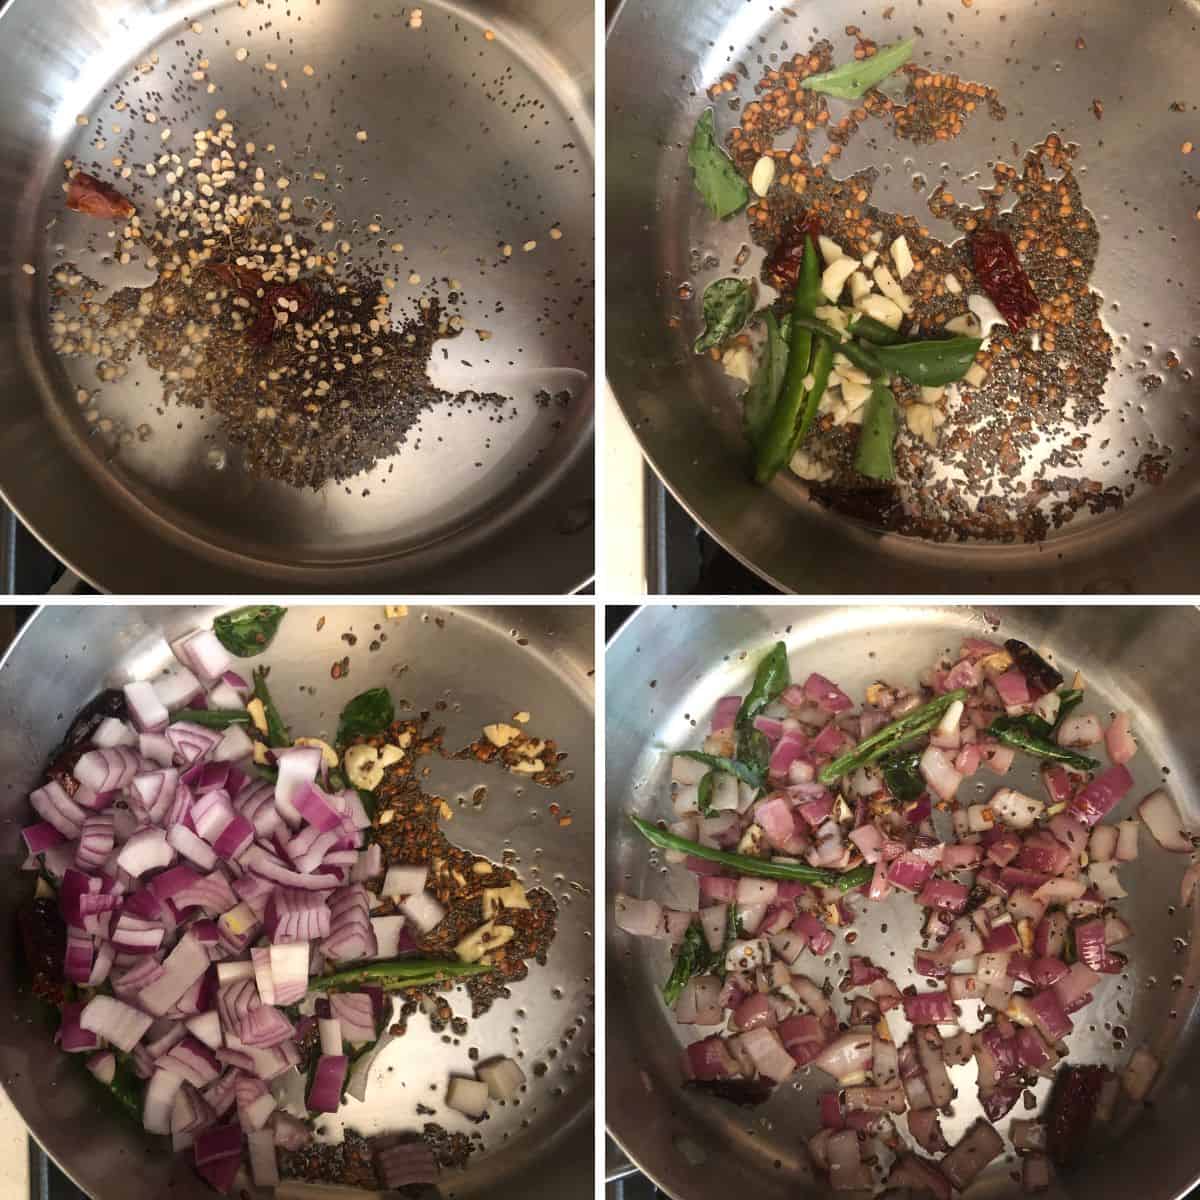 4 panel photo showing the sautéing of tadka and onions.